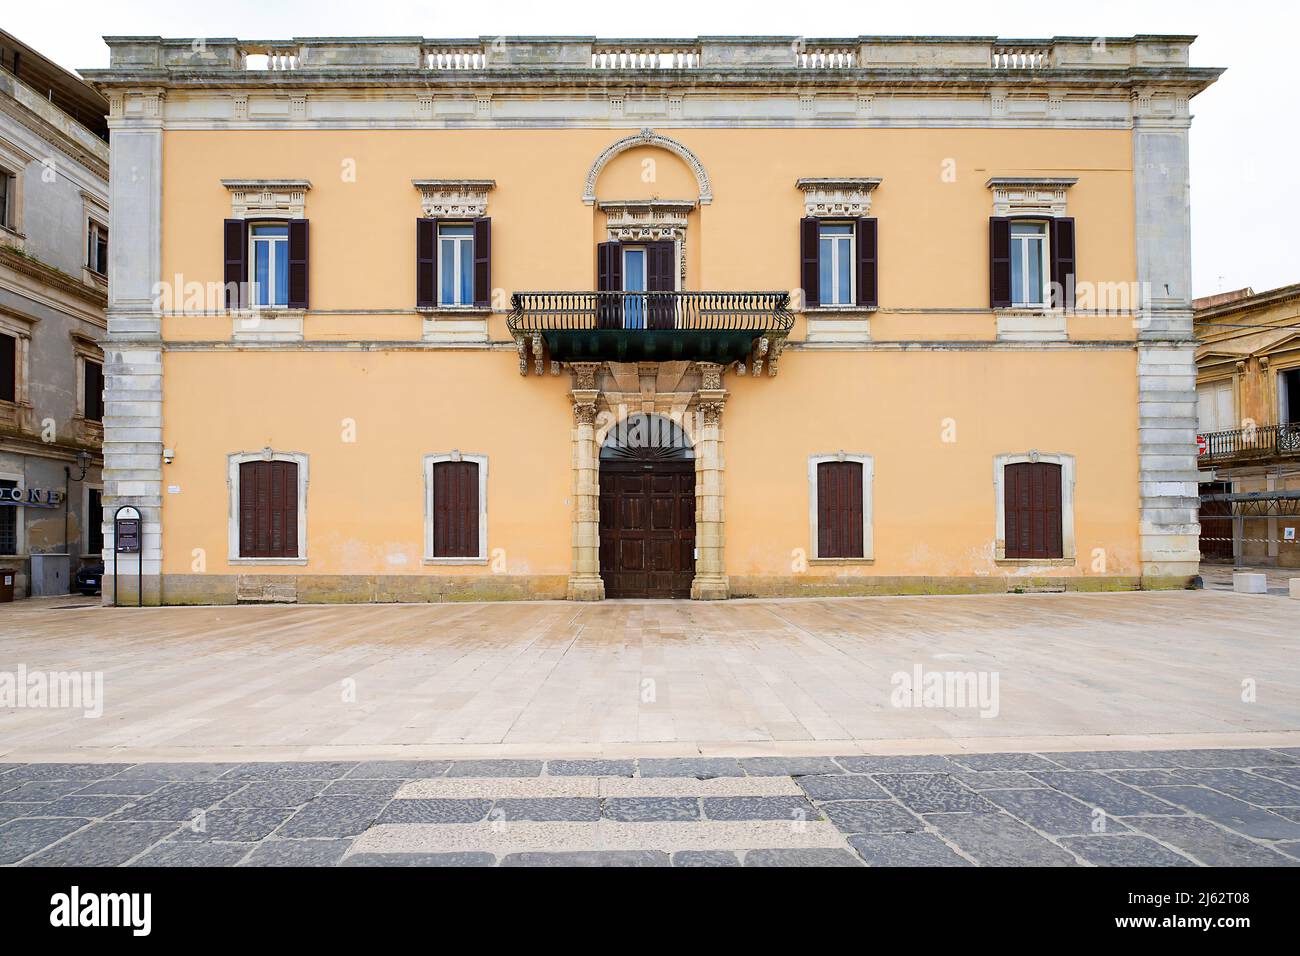 Palazzo Montenegro in Brindisi, is the most significant example of Baroque secular architecture in the city. Apulia (Puglia), Italy. Stock Photo